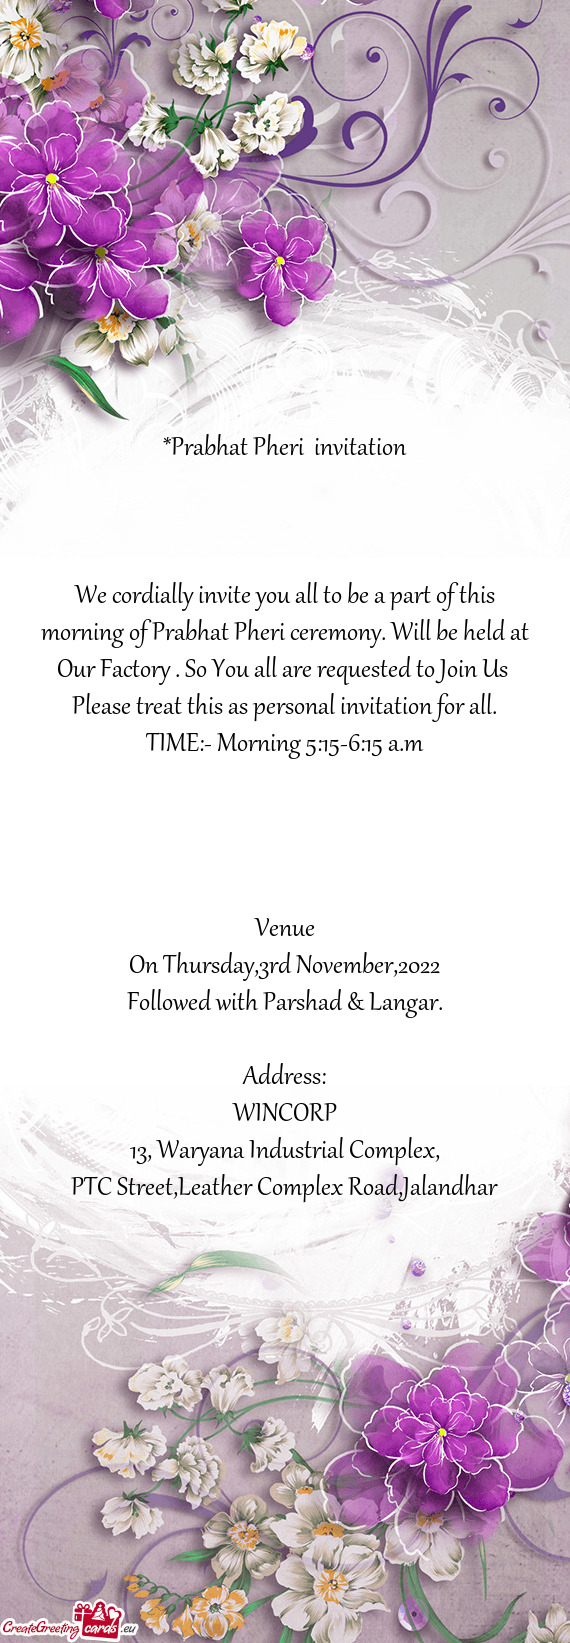 We cordially invite you all to be a part of this morning of Prabhat Pheri ceremony. Will be held at